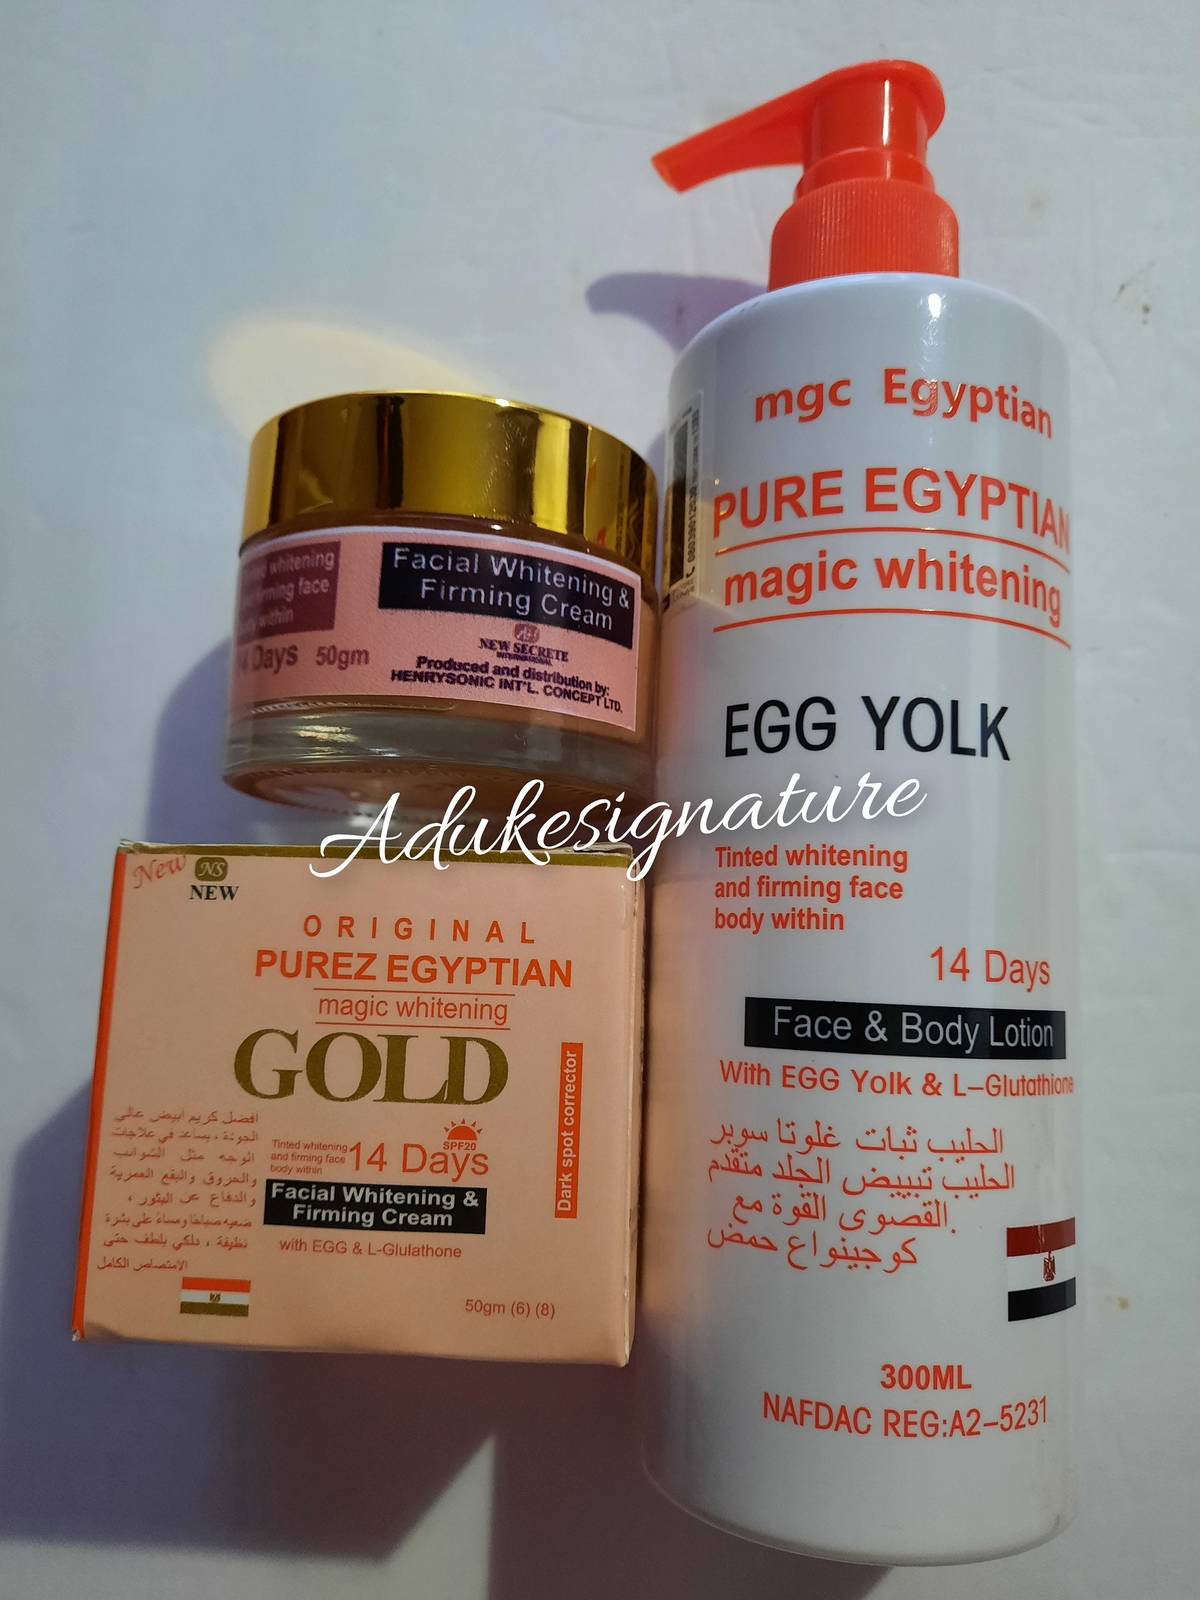 Pure egyptian magic whitening egg yolk face and body lotion and face cream